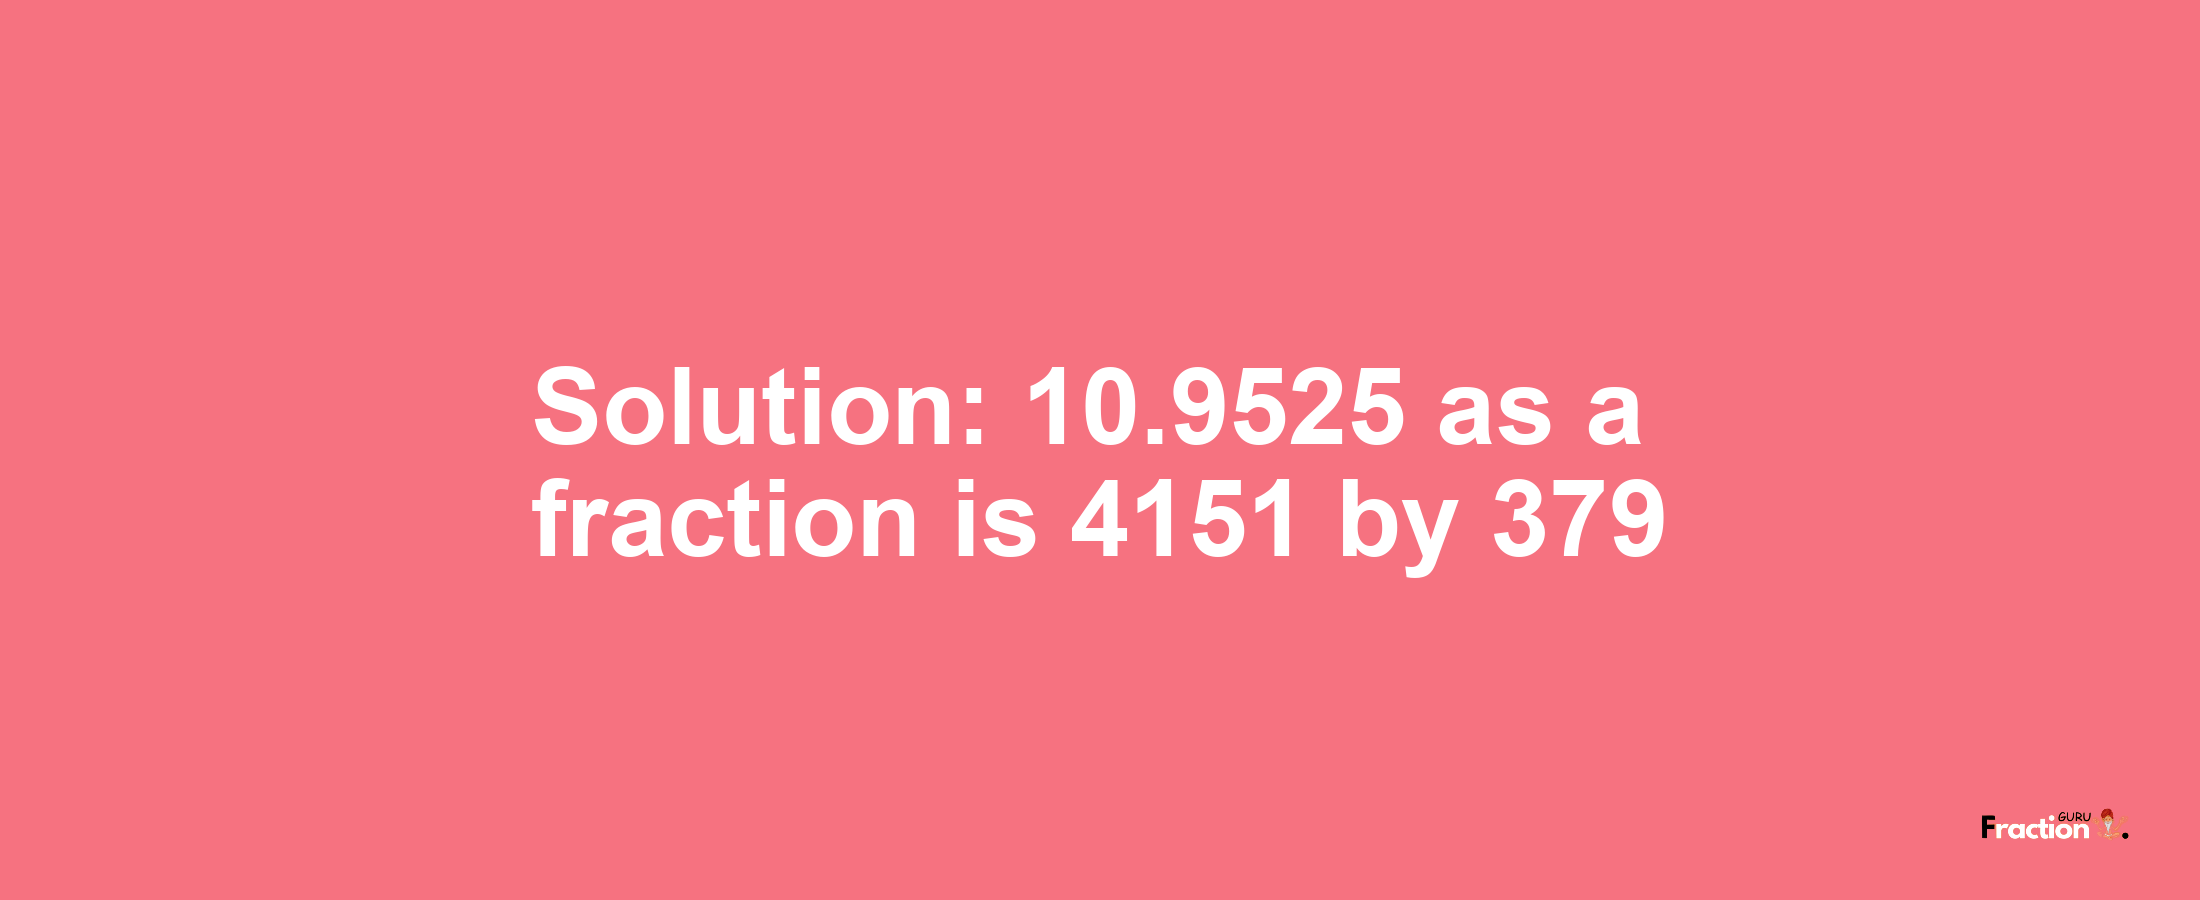 Solution:10.9525 as a fraction is 4151/379